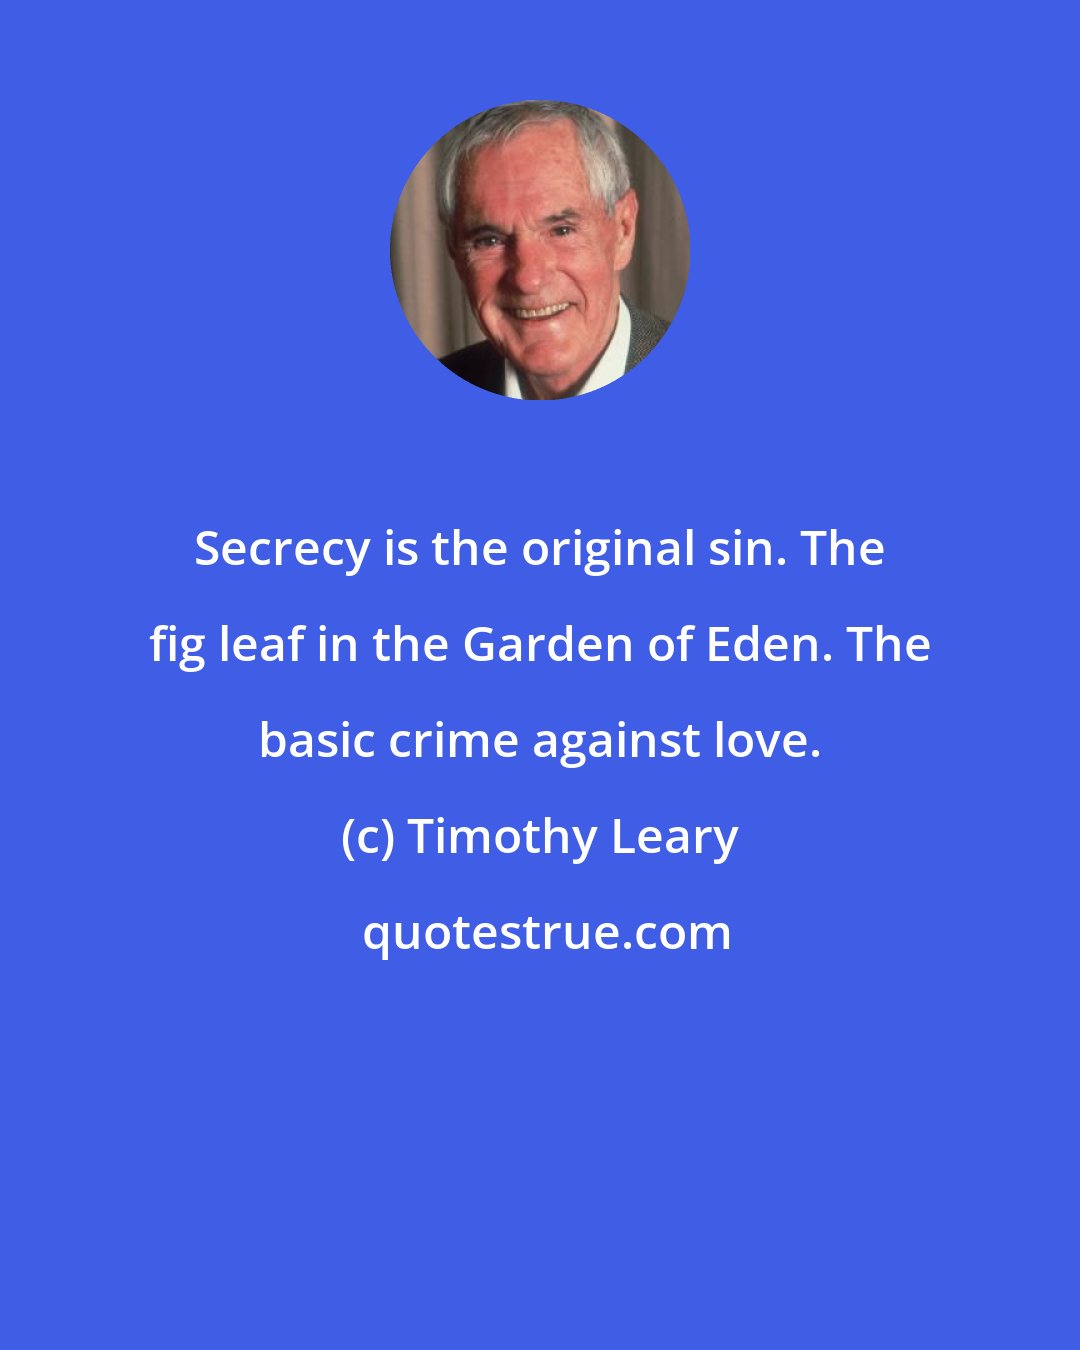 Timothy Leary: Secrecy is the original sin. The fig leaf in the Garden of Eden. The basic crime against love.